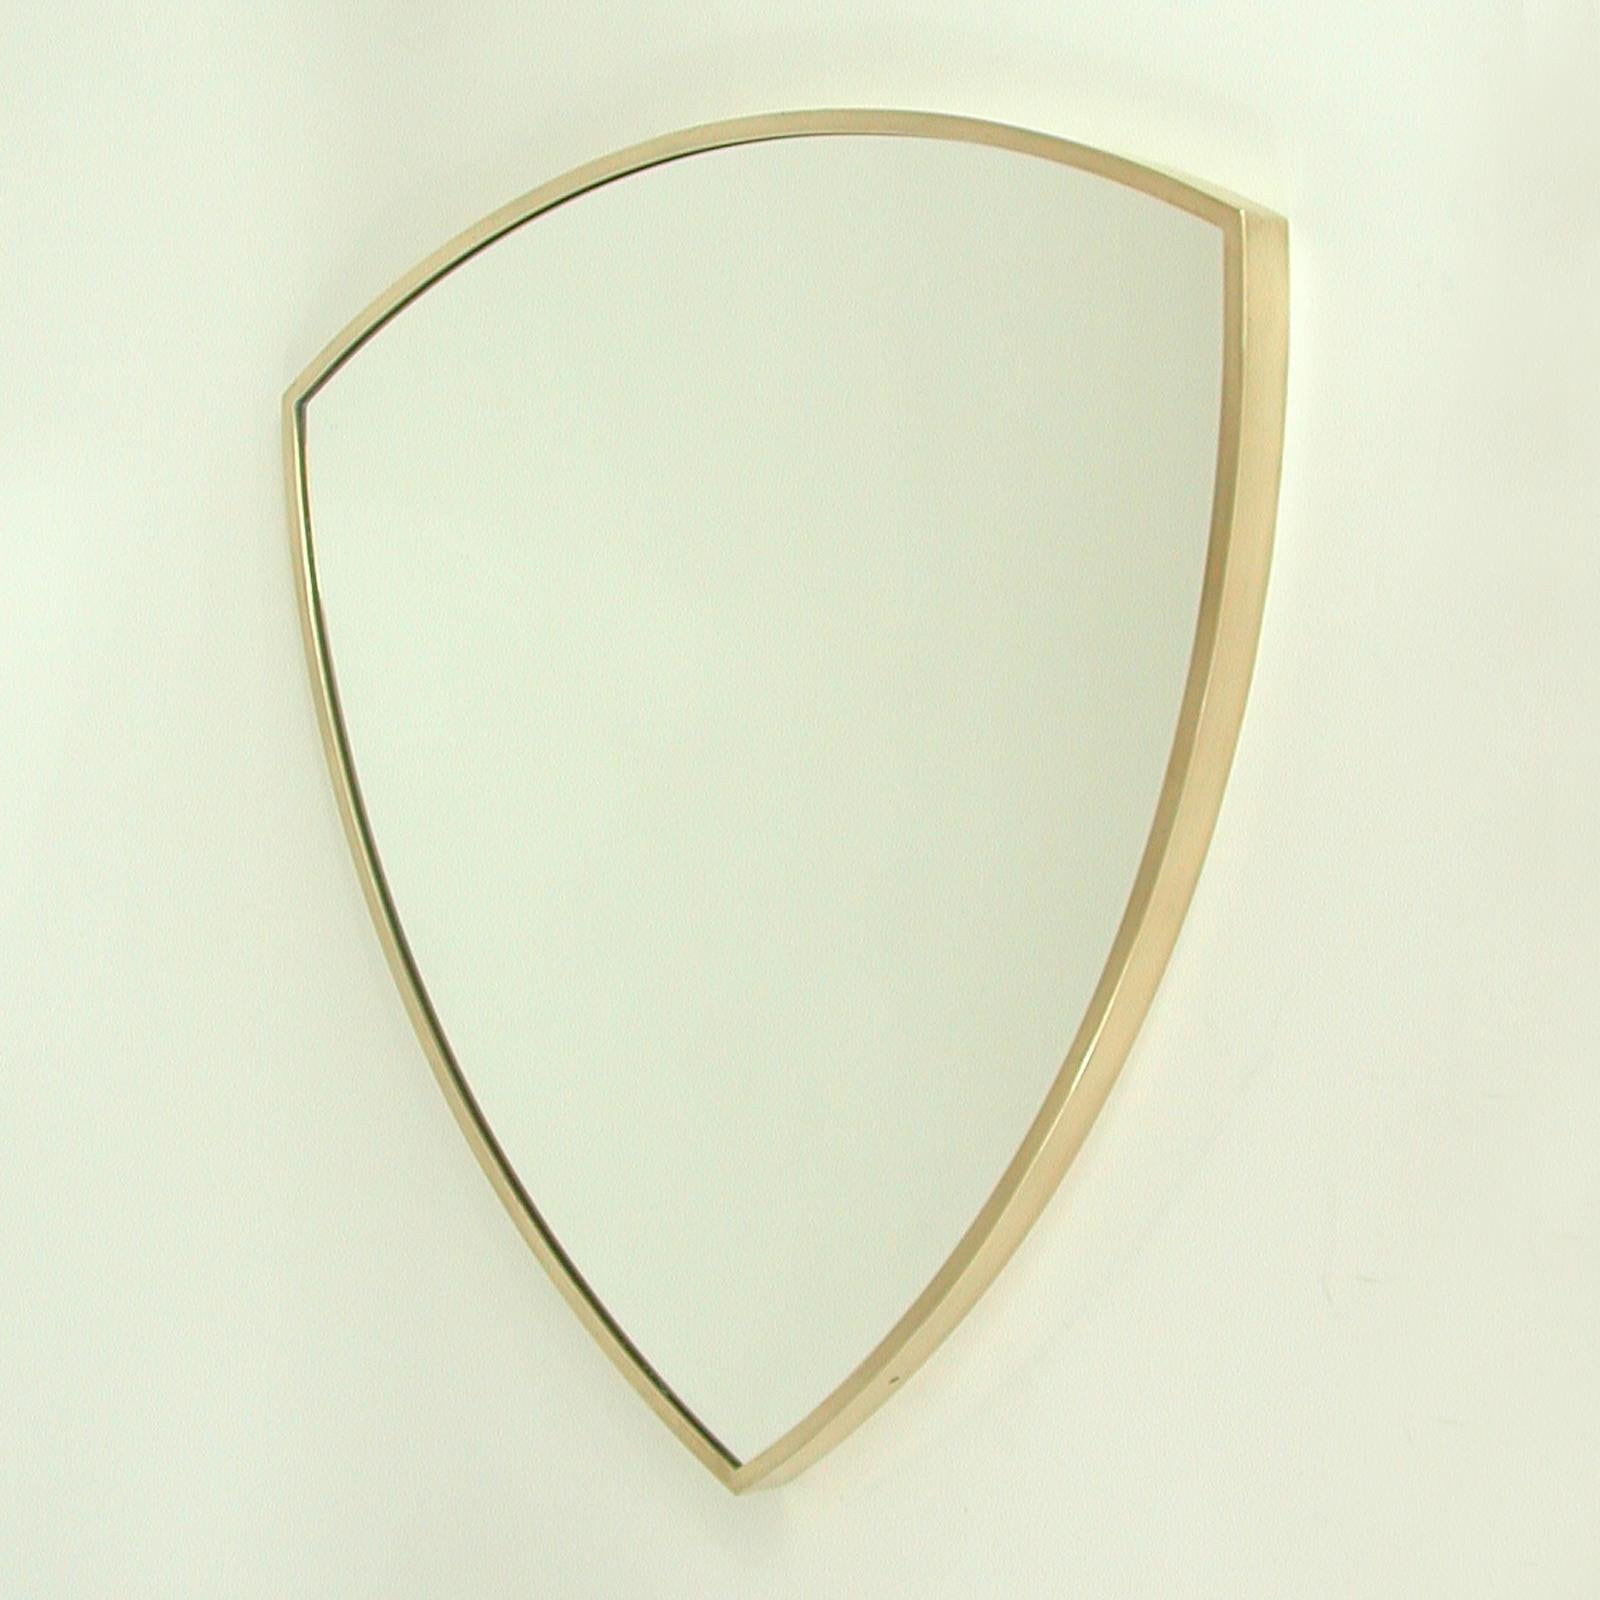 Midcentury Brass Shield Shaped Wall Mirror, Gio Ponti Style, Italy 1950s For Sale 3